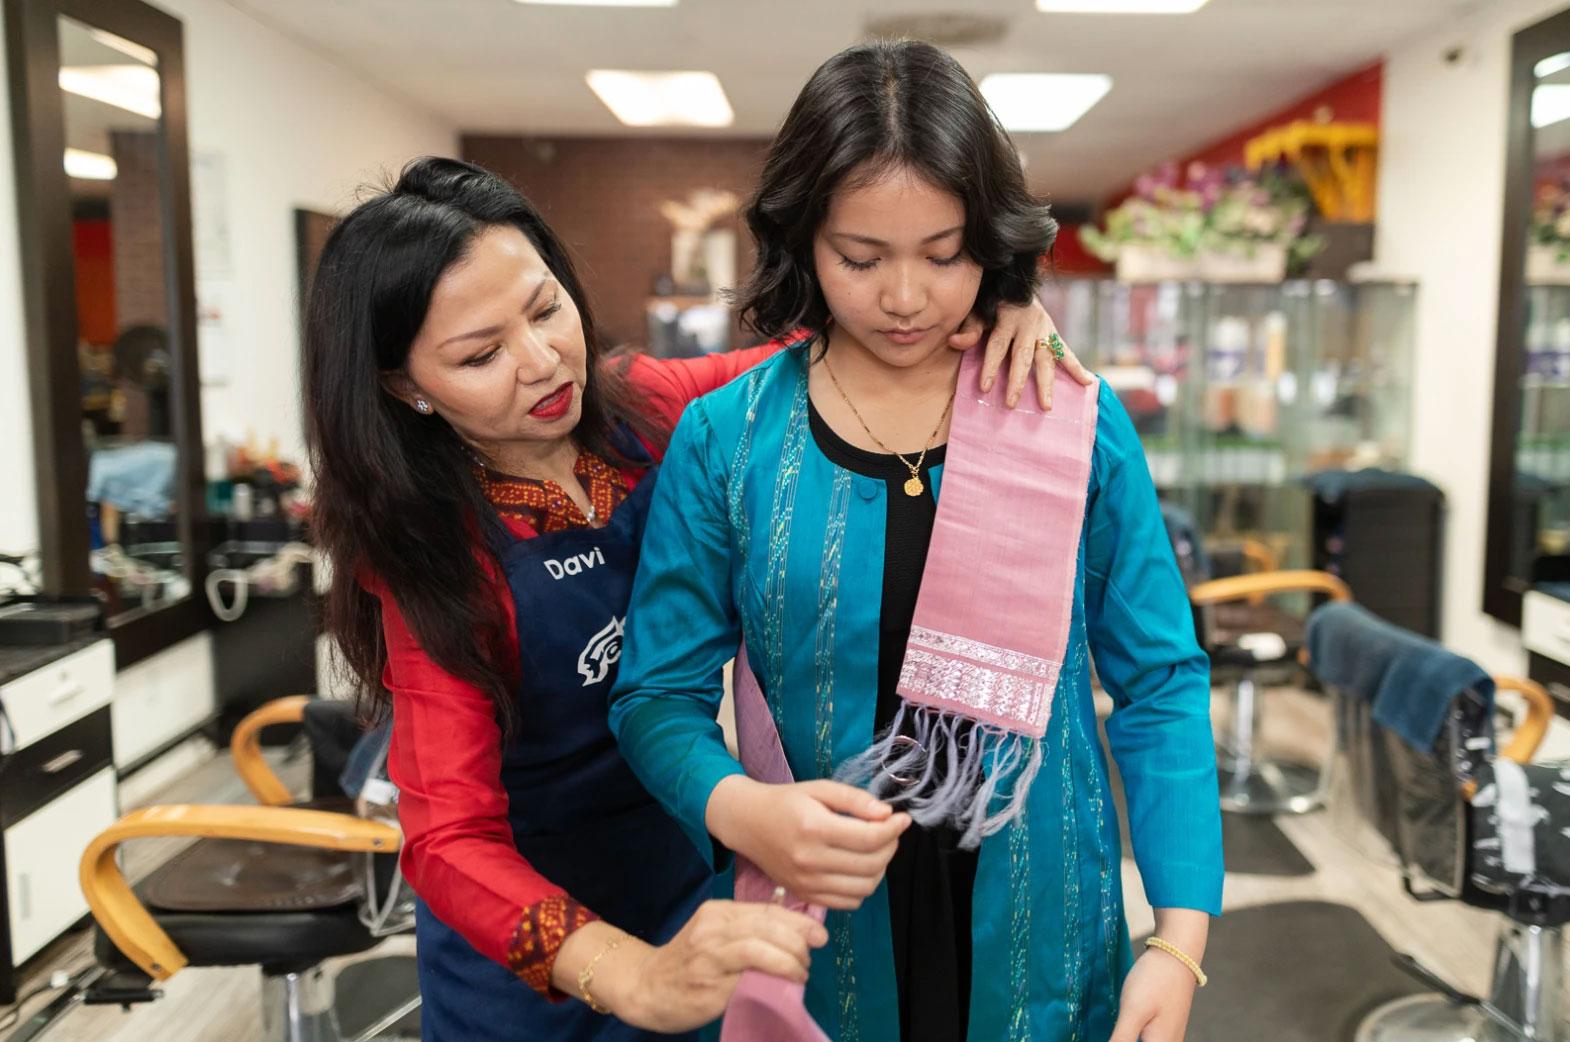 Ariya Tok gets help from her mother Dannaly as she puts on traditional Cambodian attire to attend her graduation ceremony at California State University Long Beach.